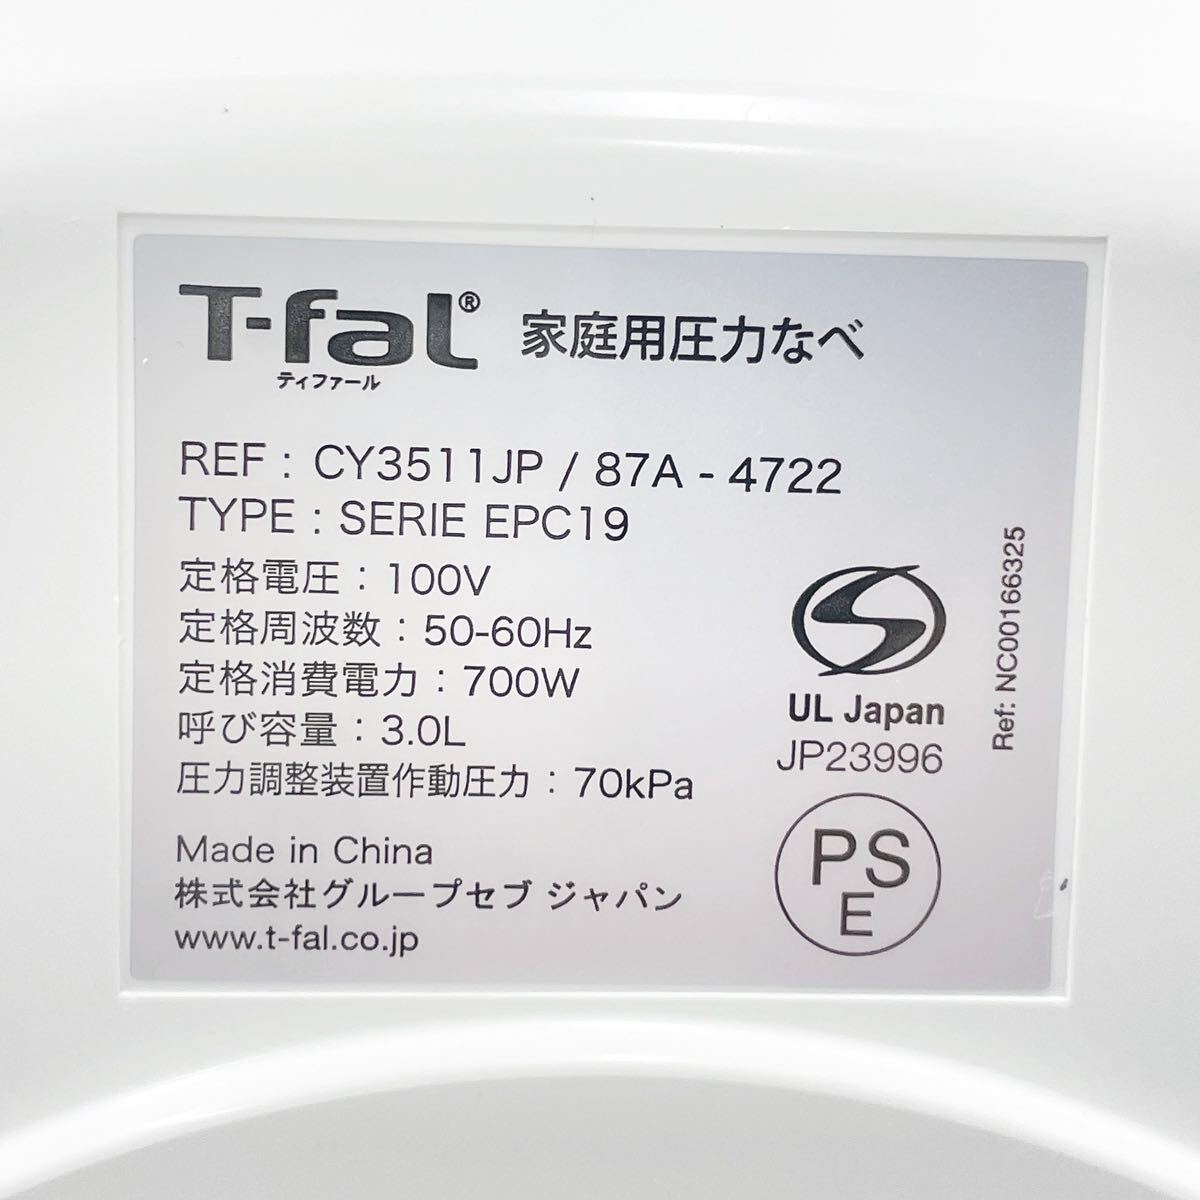  unused storage goods electrification has confirmed T-falti fur ruCY3511JPlakla* cooker home use pressure pan compact electric pressure cooker addition photograph equipped 